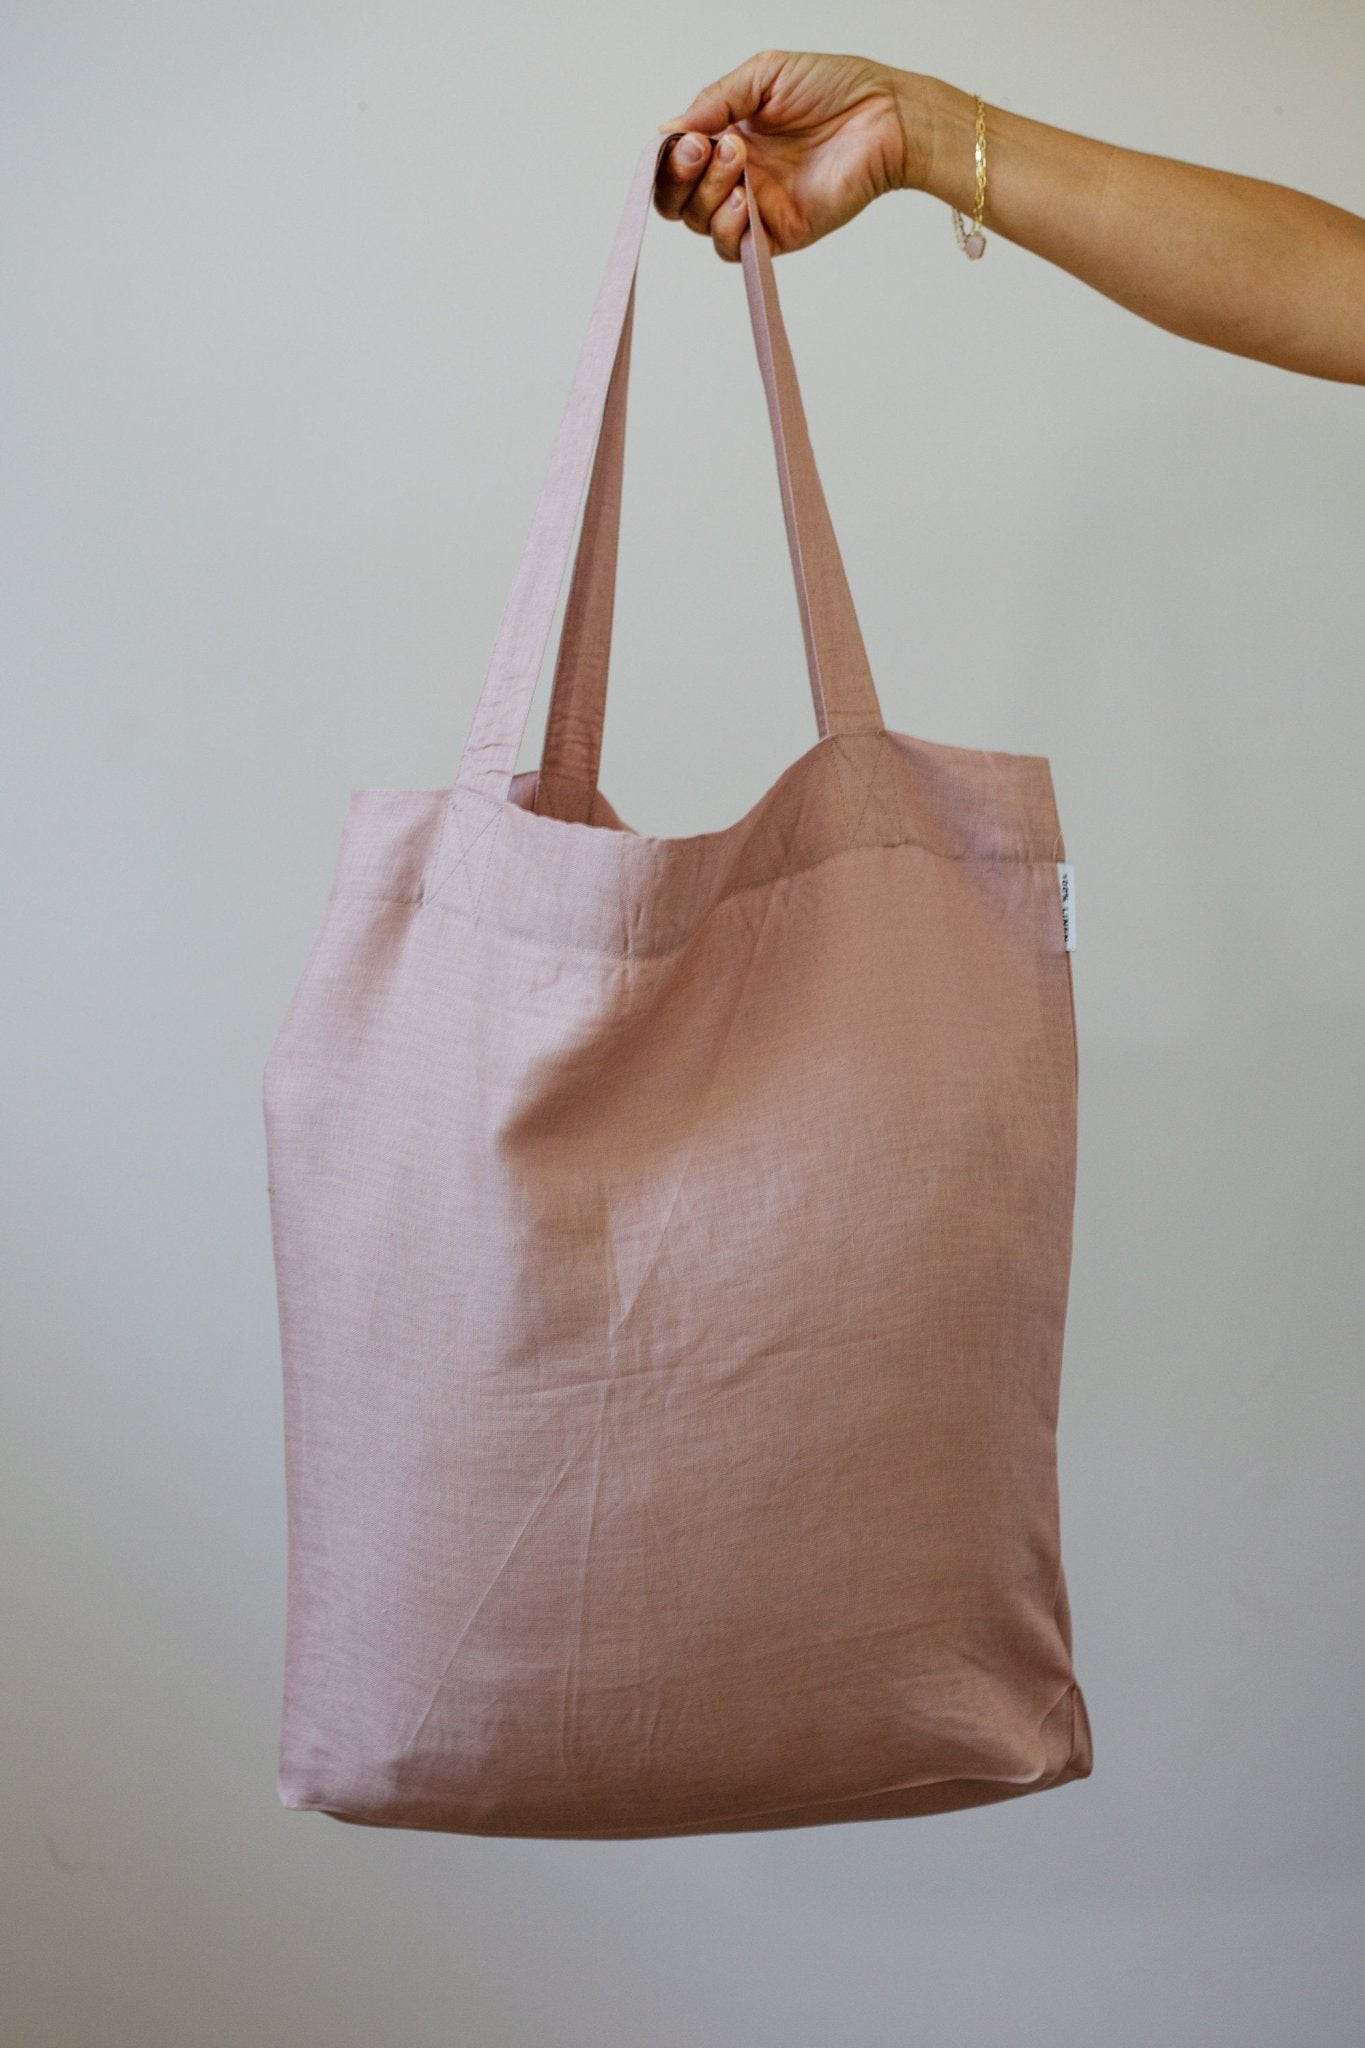 Load image into Gallery viewer, Large Linen Shopping Tote Bag | Market Tote Bag | Linen Tote Bag | Eco Market Bags | Personalized Monogram Tote Linen Bag | Eco Friendly Bag
